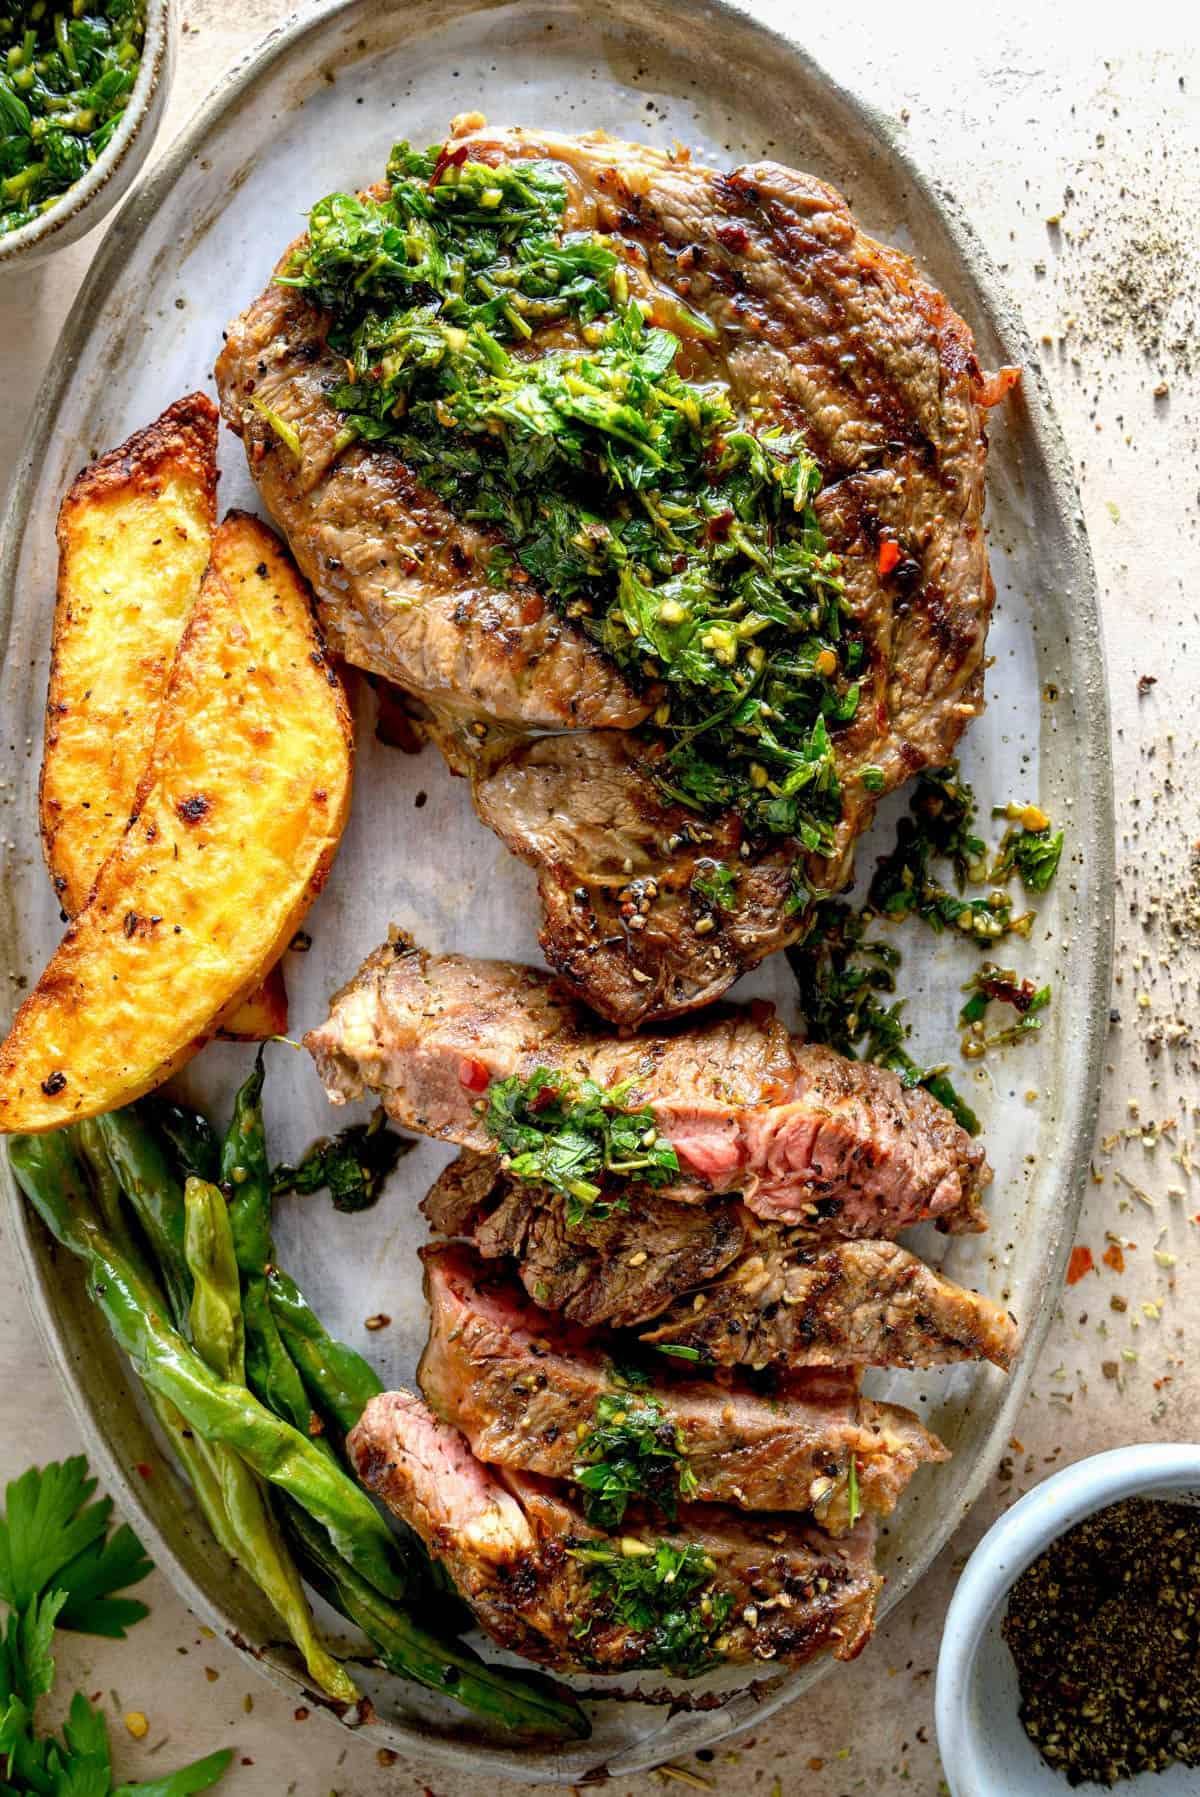 Sliced ribeye steak with chimichurri sauce, vegetables, and potato wedges on a plate.